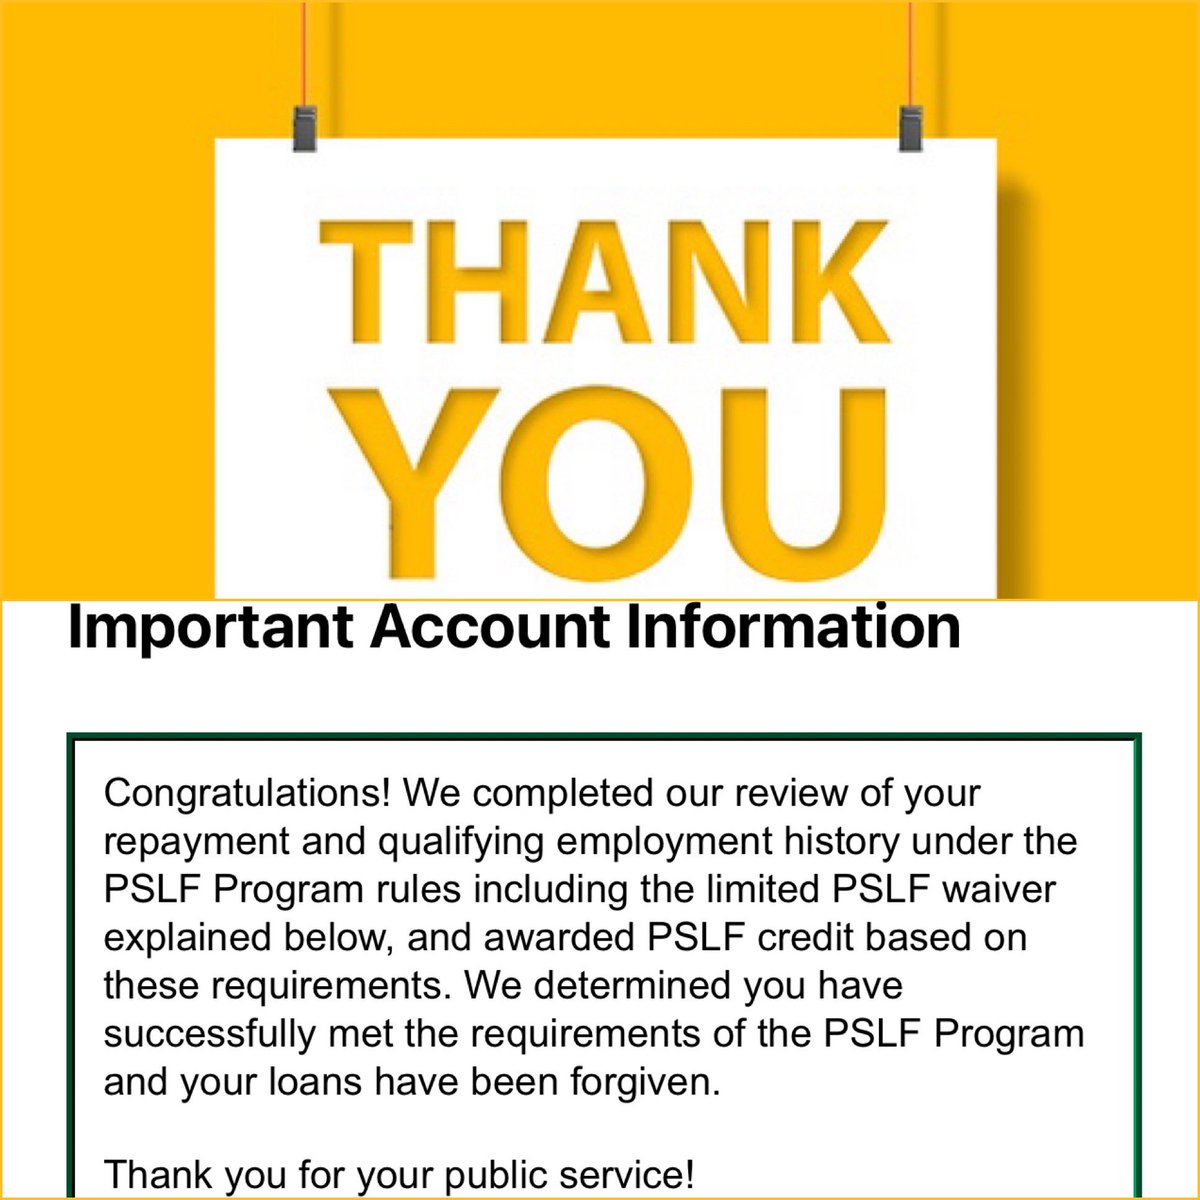 @usedgov @FAFSA I’m grateful to have received forgiveness of my Parent PLUS Loans after 30+ years service in public education. Thank you! @potus @SecCardona @FSACOO 
#PSLFWorks #CancelAllStudentDebt